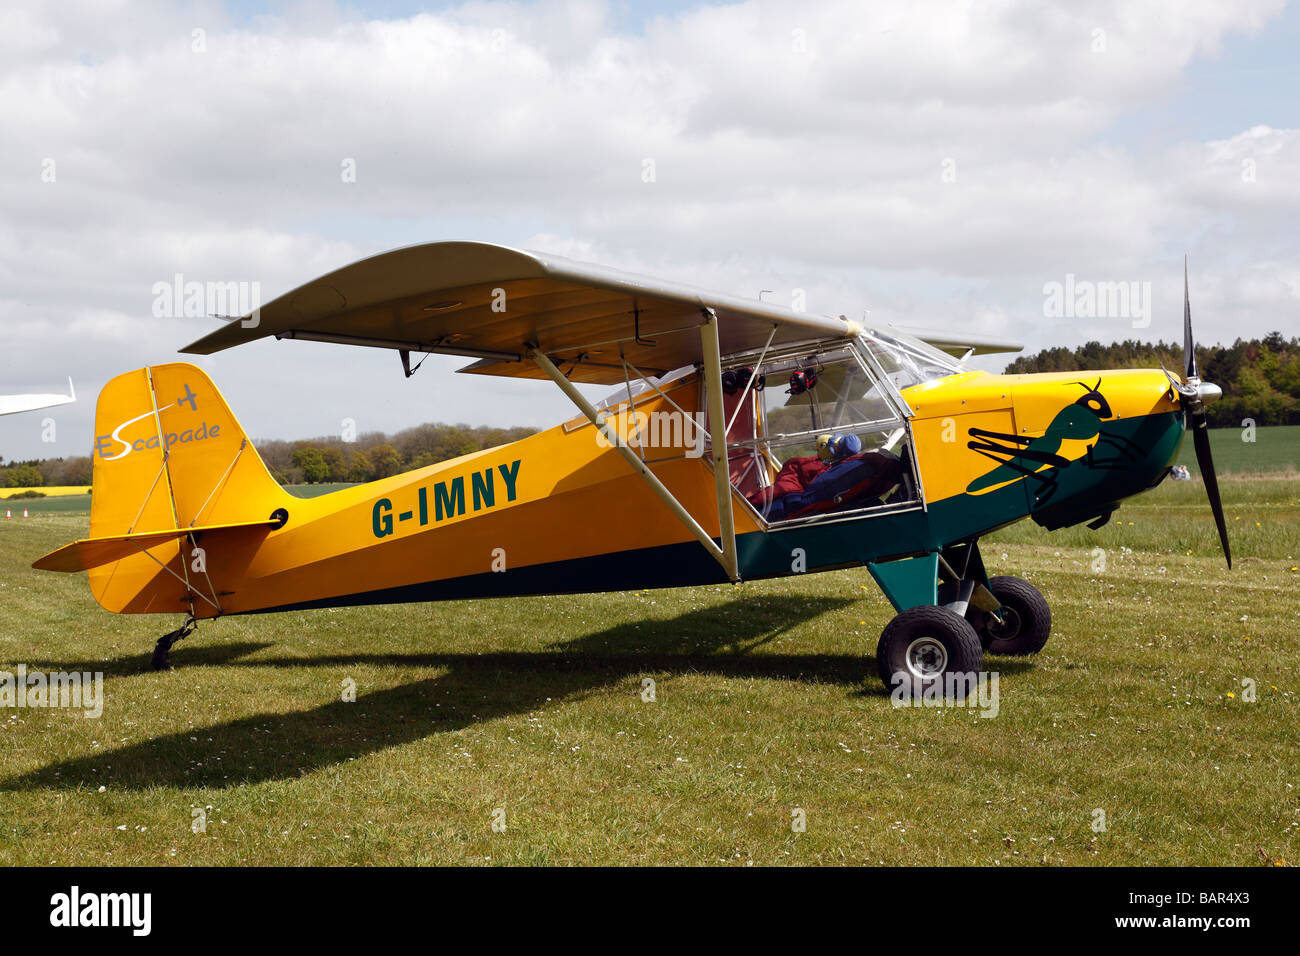 An Escapade microlight aircraft at Popham airfield in Hampshire in England Stock Photo